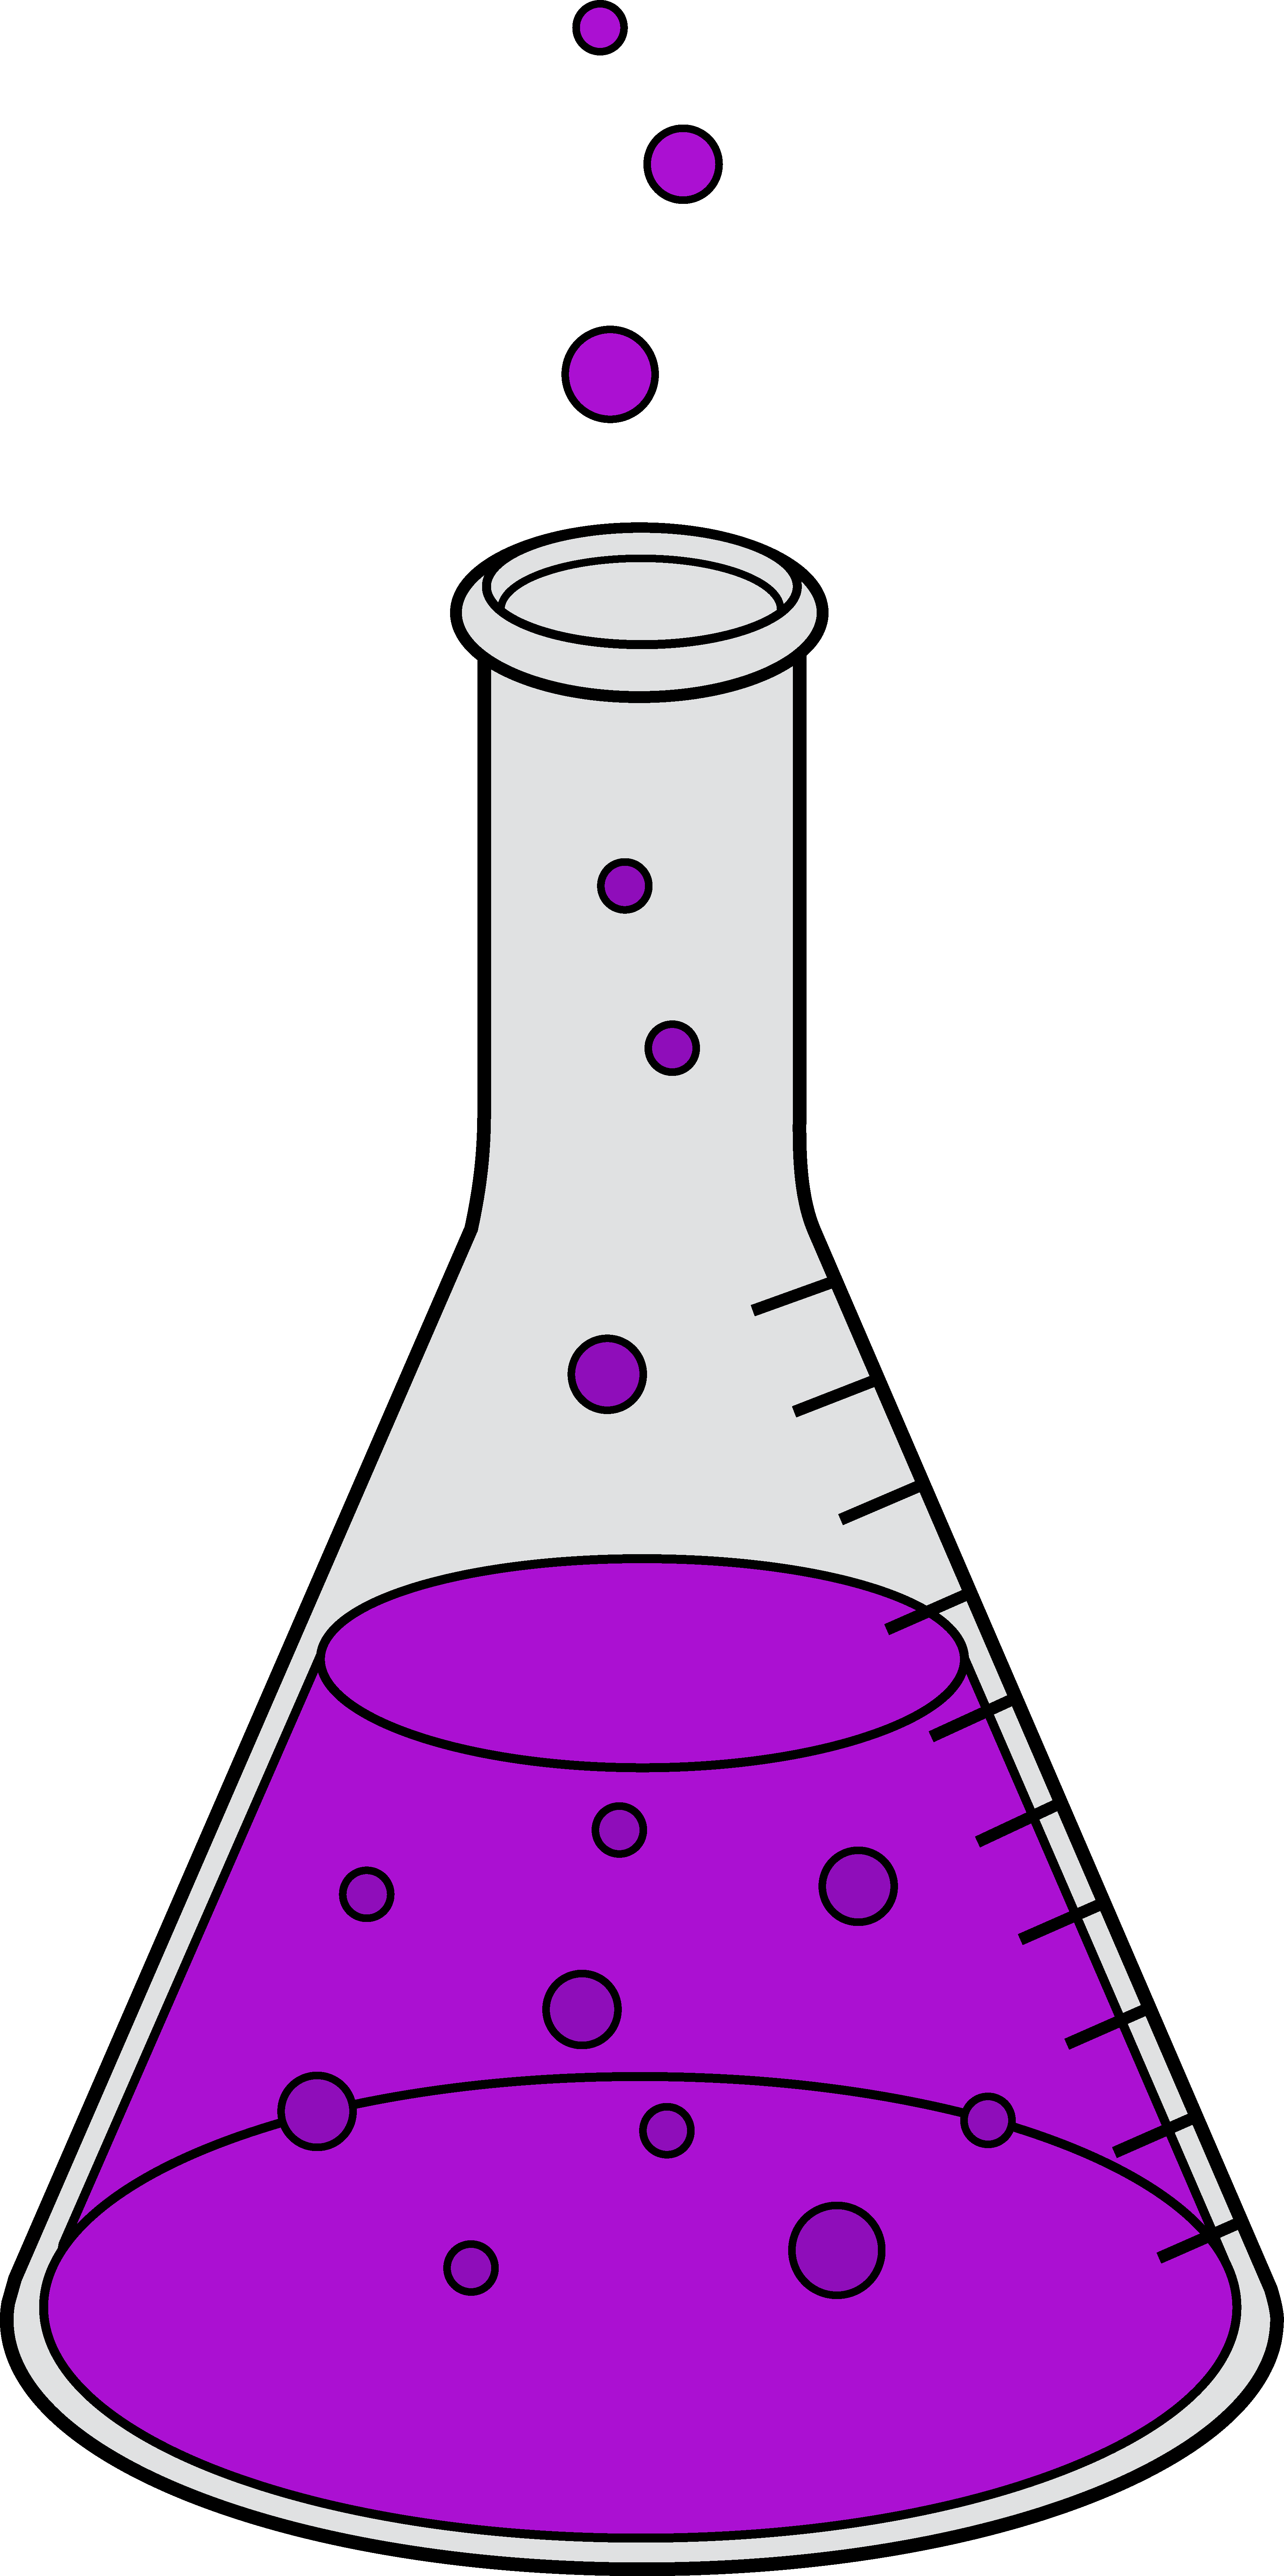 free science animated clip art - photo #40